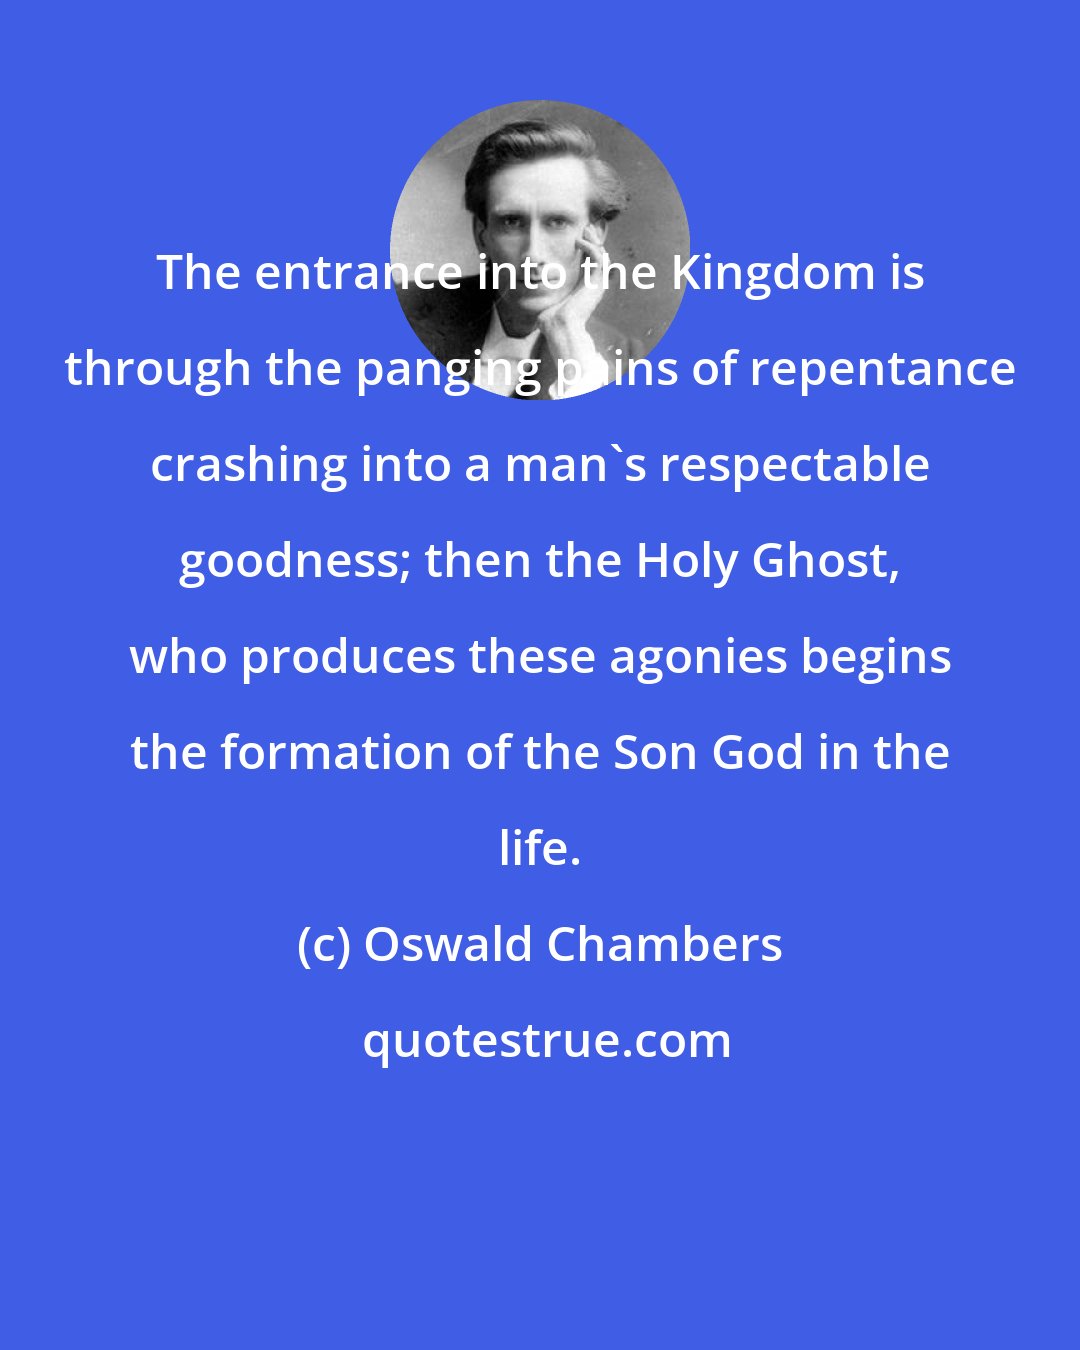 Oswald Chambers: The entrance into the Kingdom is through the panging pains of repentance crashing into a man's respectable goodness; then the Holy Ghost, who produces these agonies begins the formation of the Son God in the life.